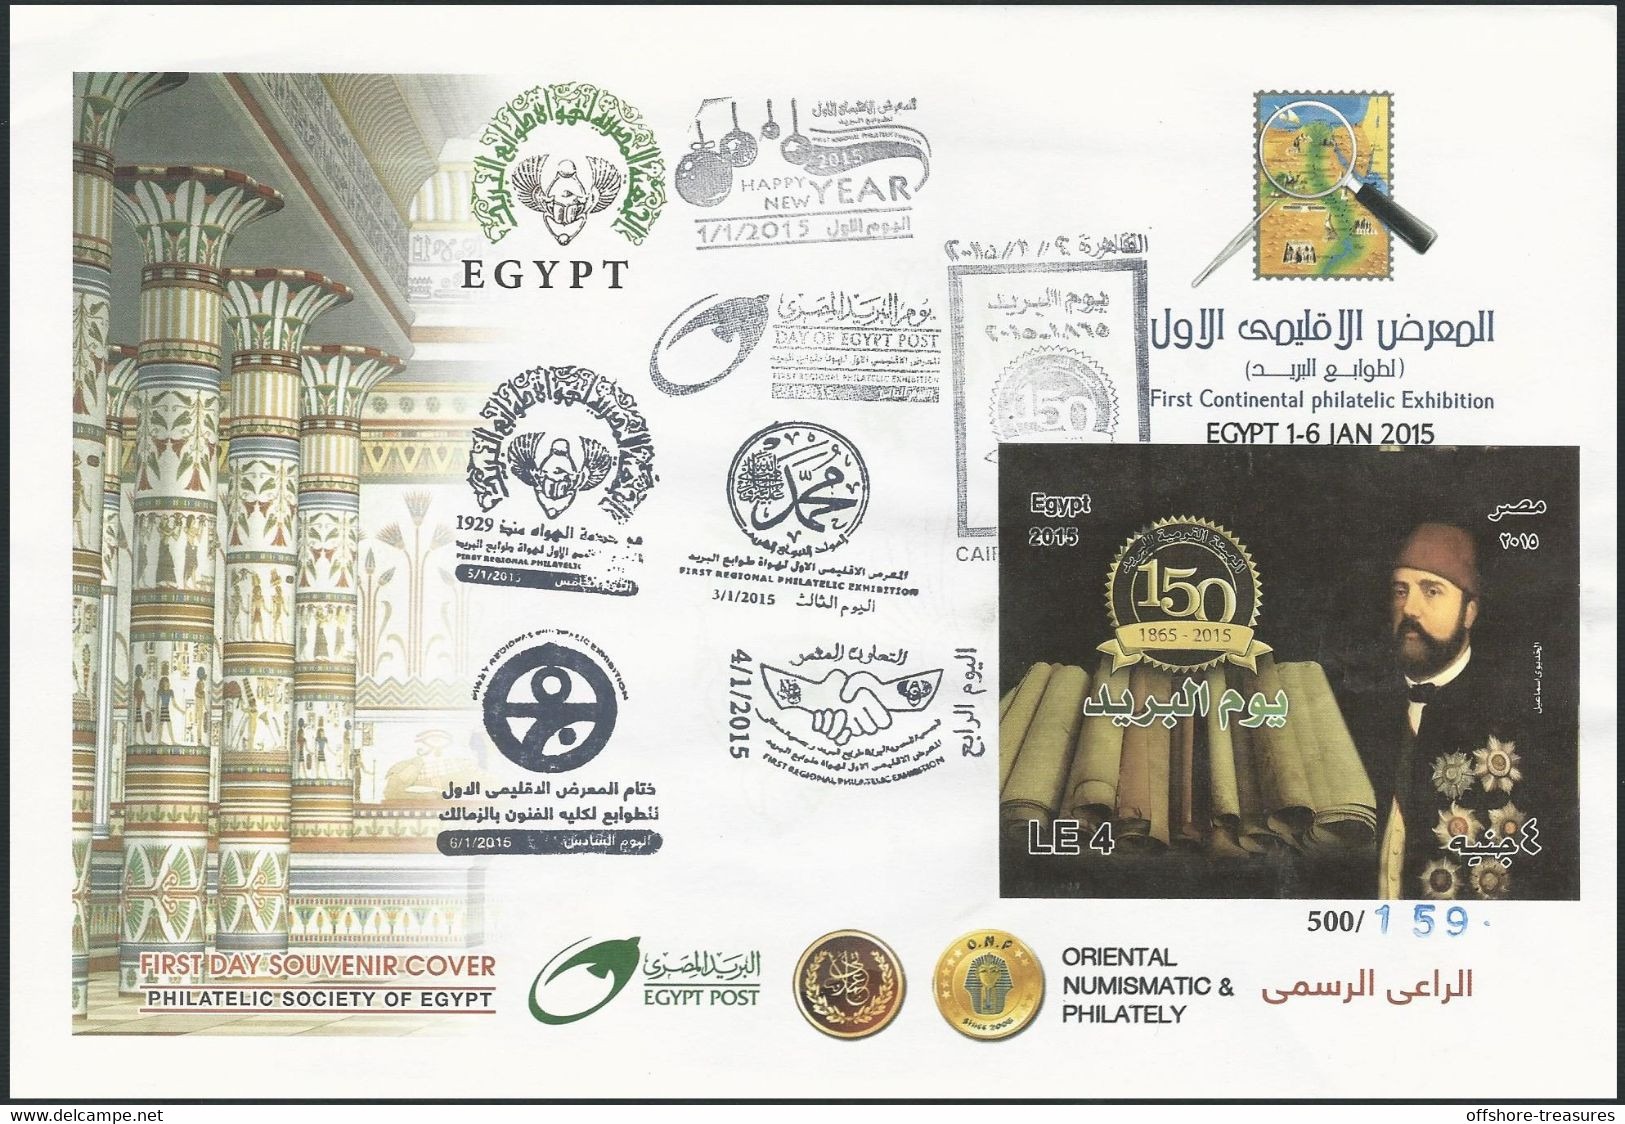 EGYPT 2015 POST DAY 2 FDC / FIRST DAY COVER Limited Edition Certified - ALL POSTAL EXHIBITION 6 DAYS Cachets 159/500 - Covers & Documents